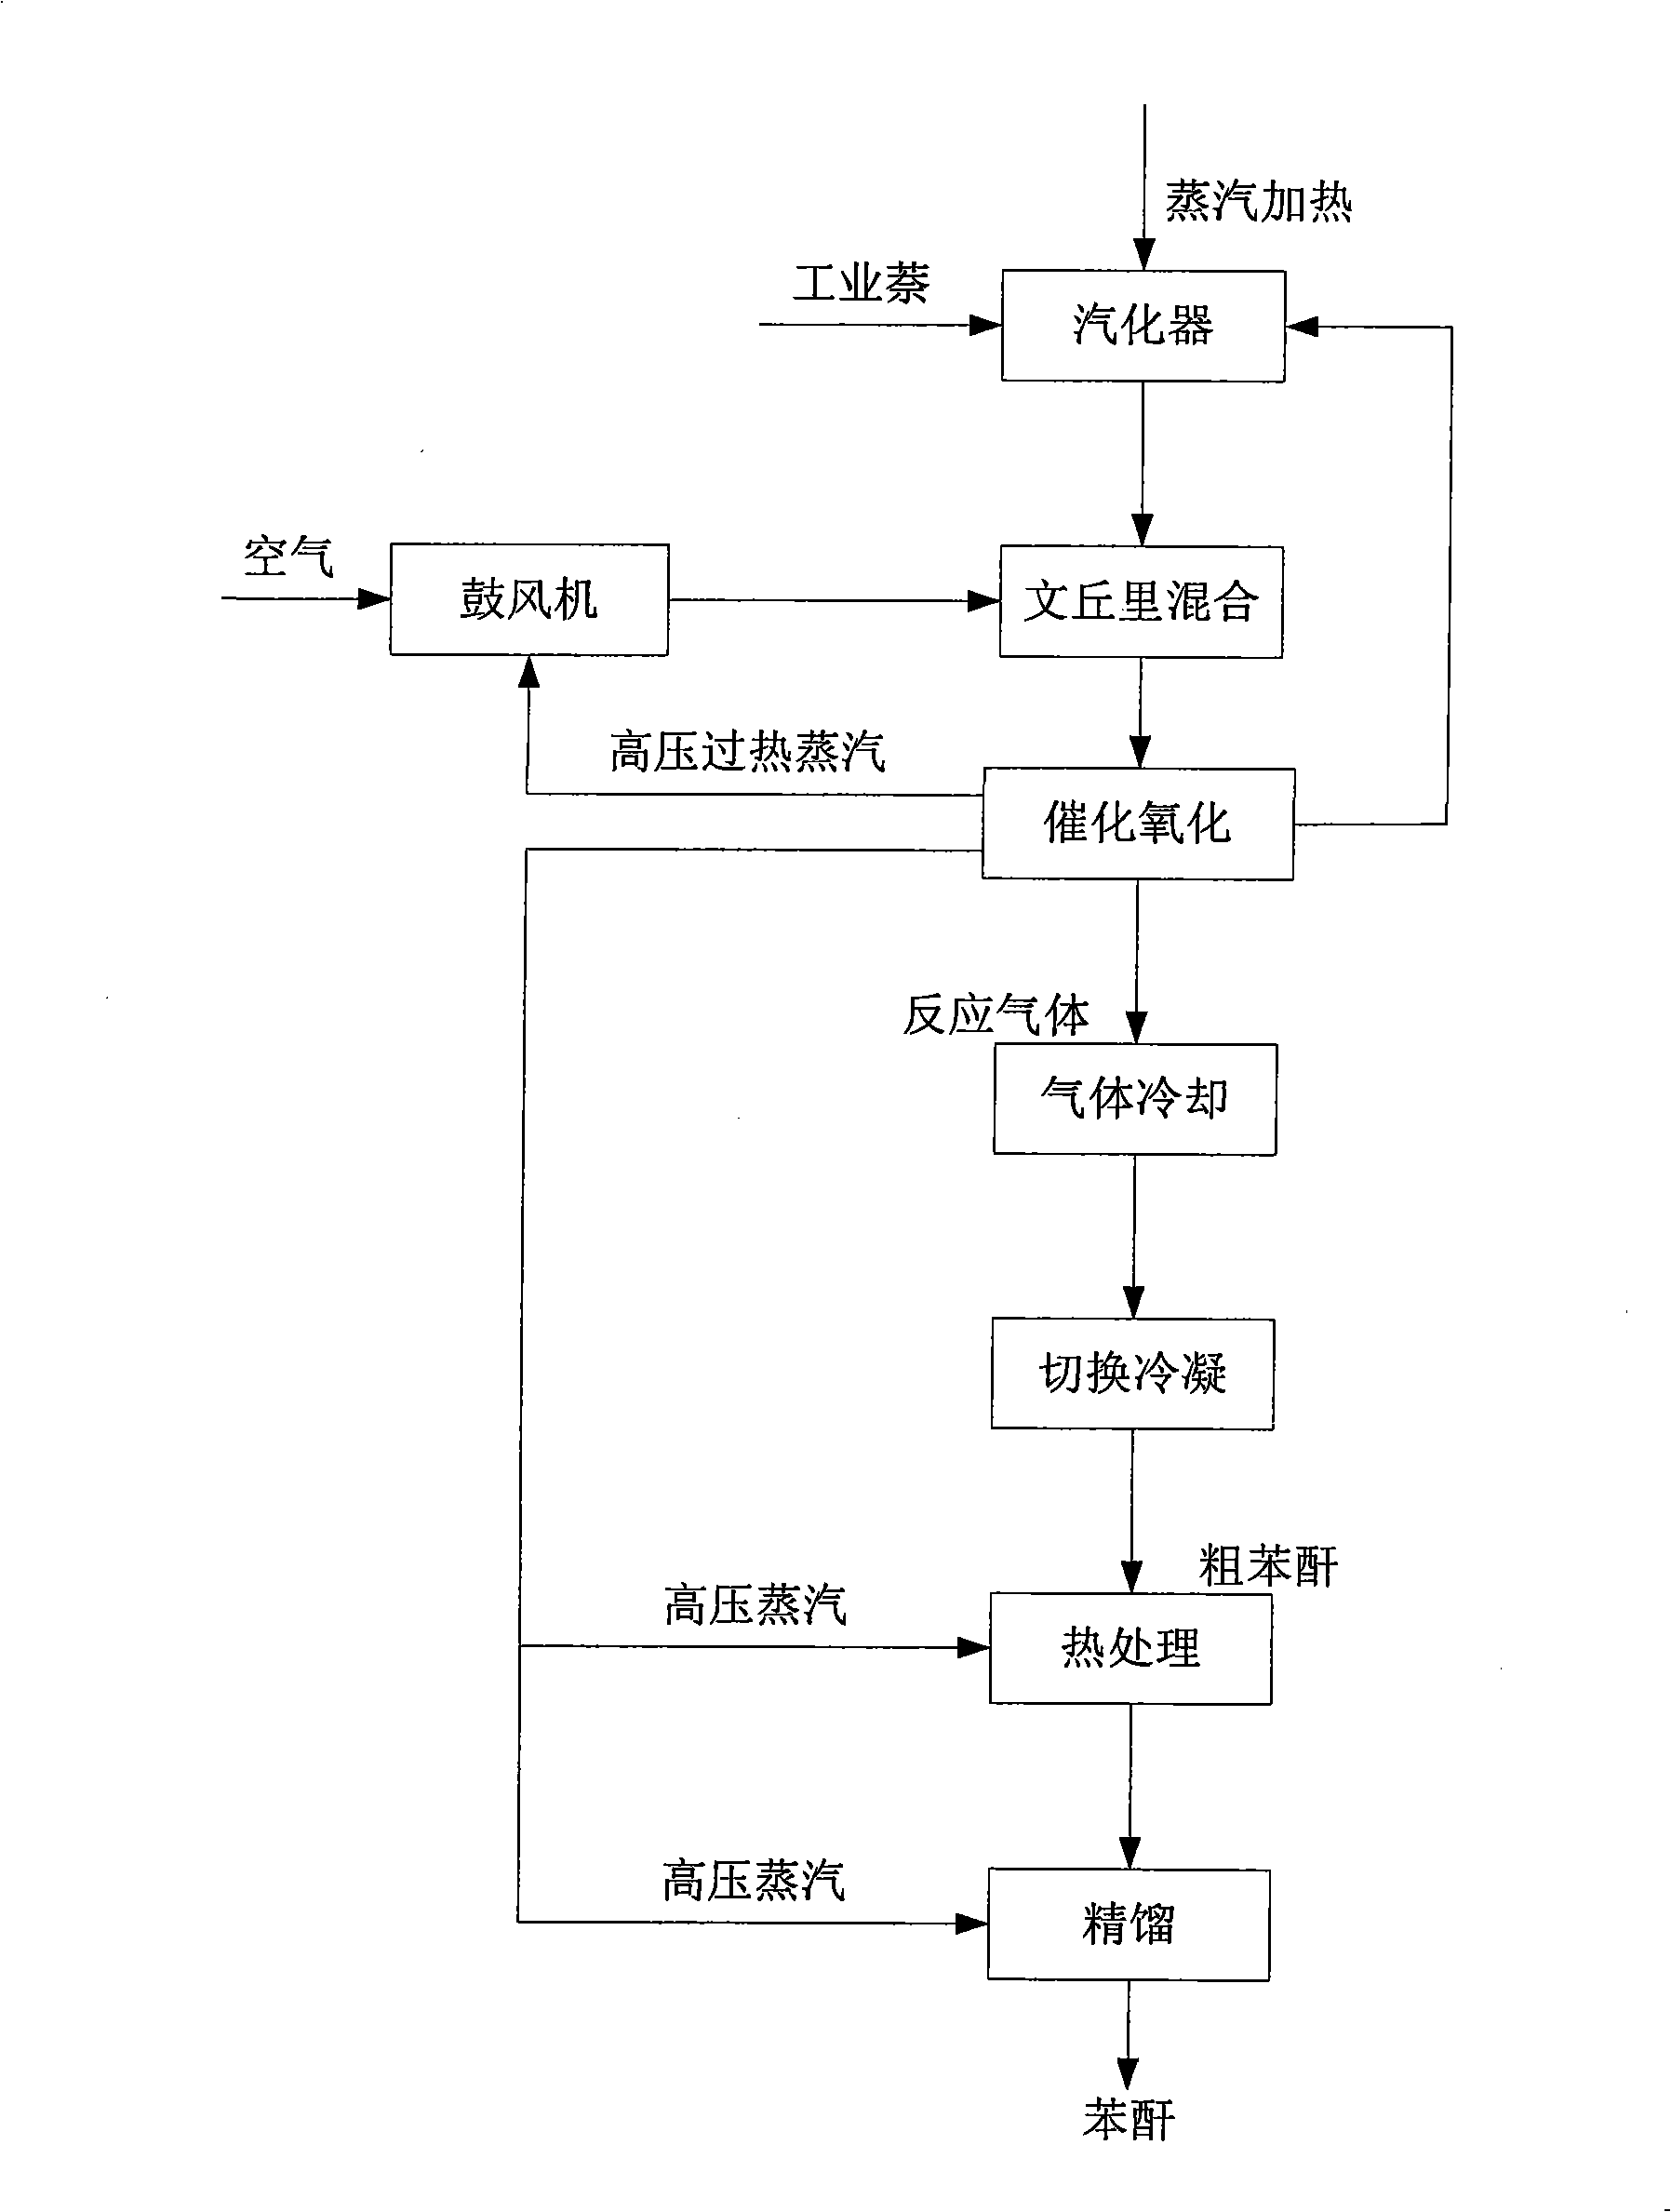 Industrialized production process of benzoic anhydride